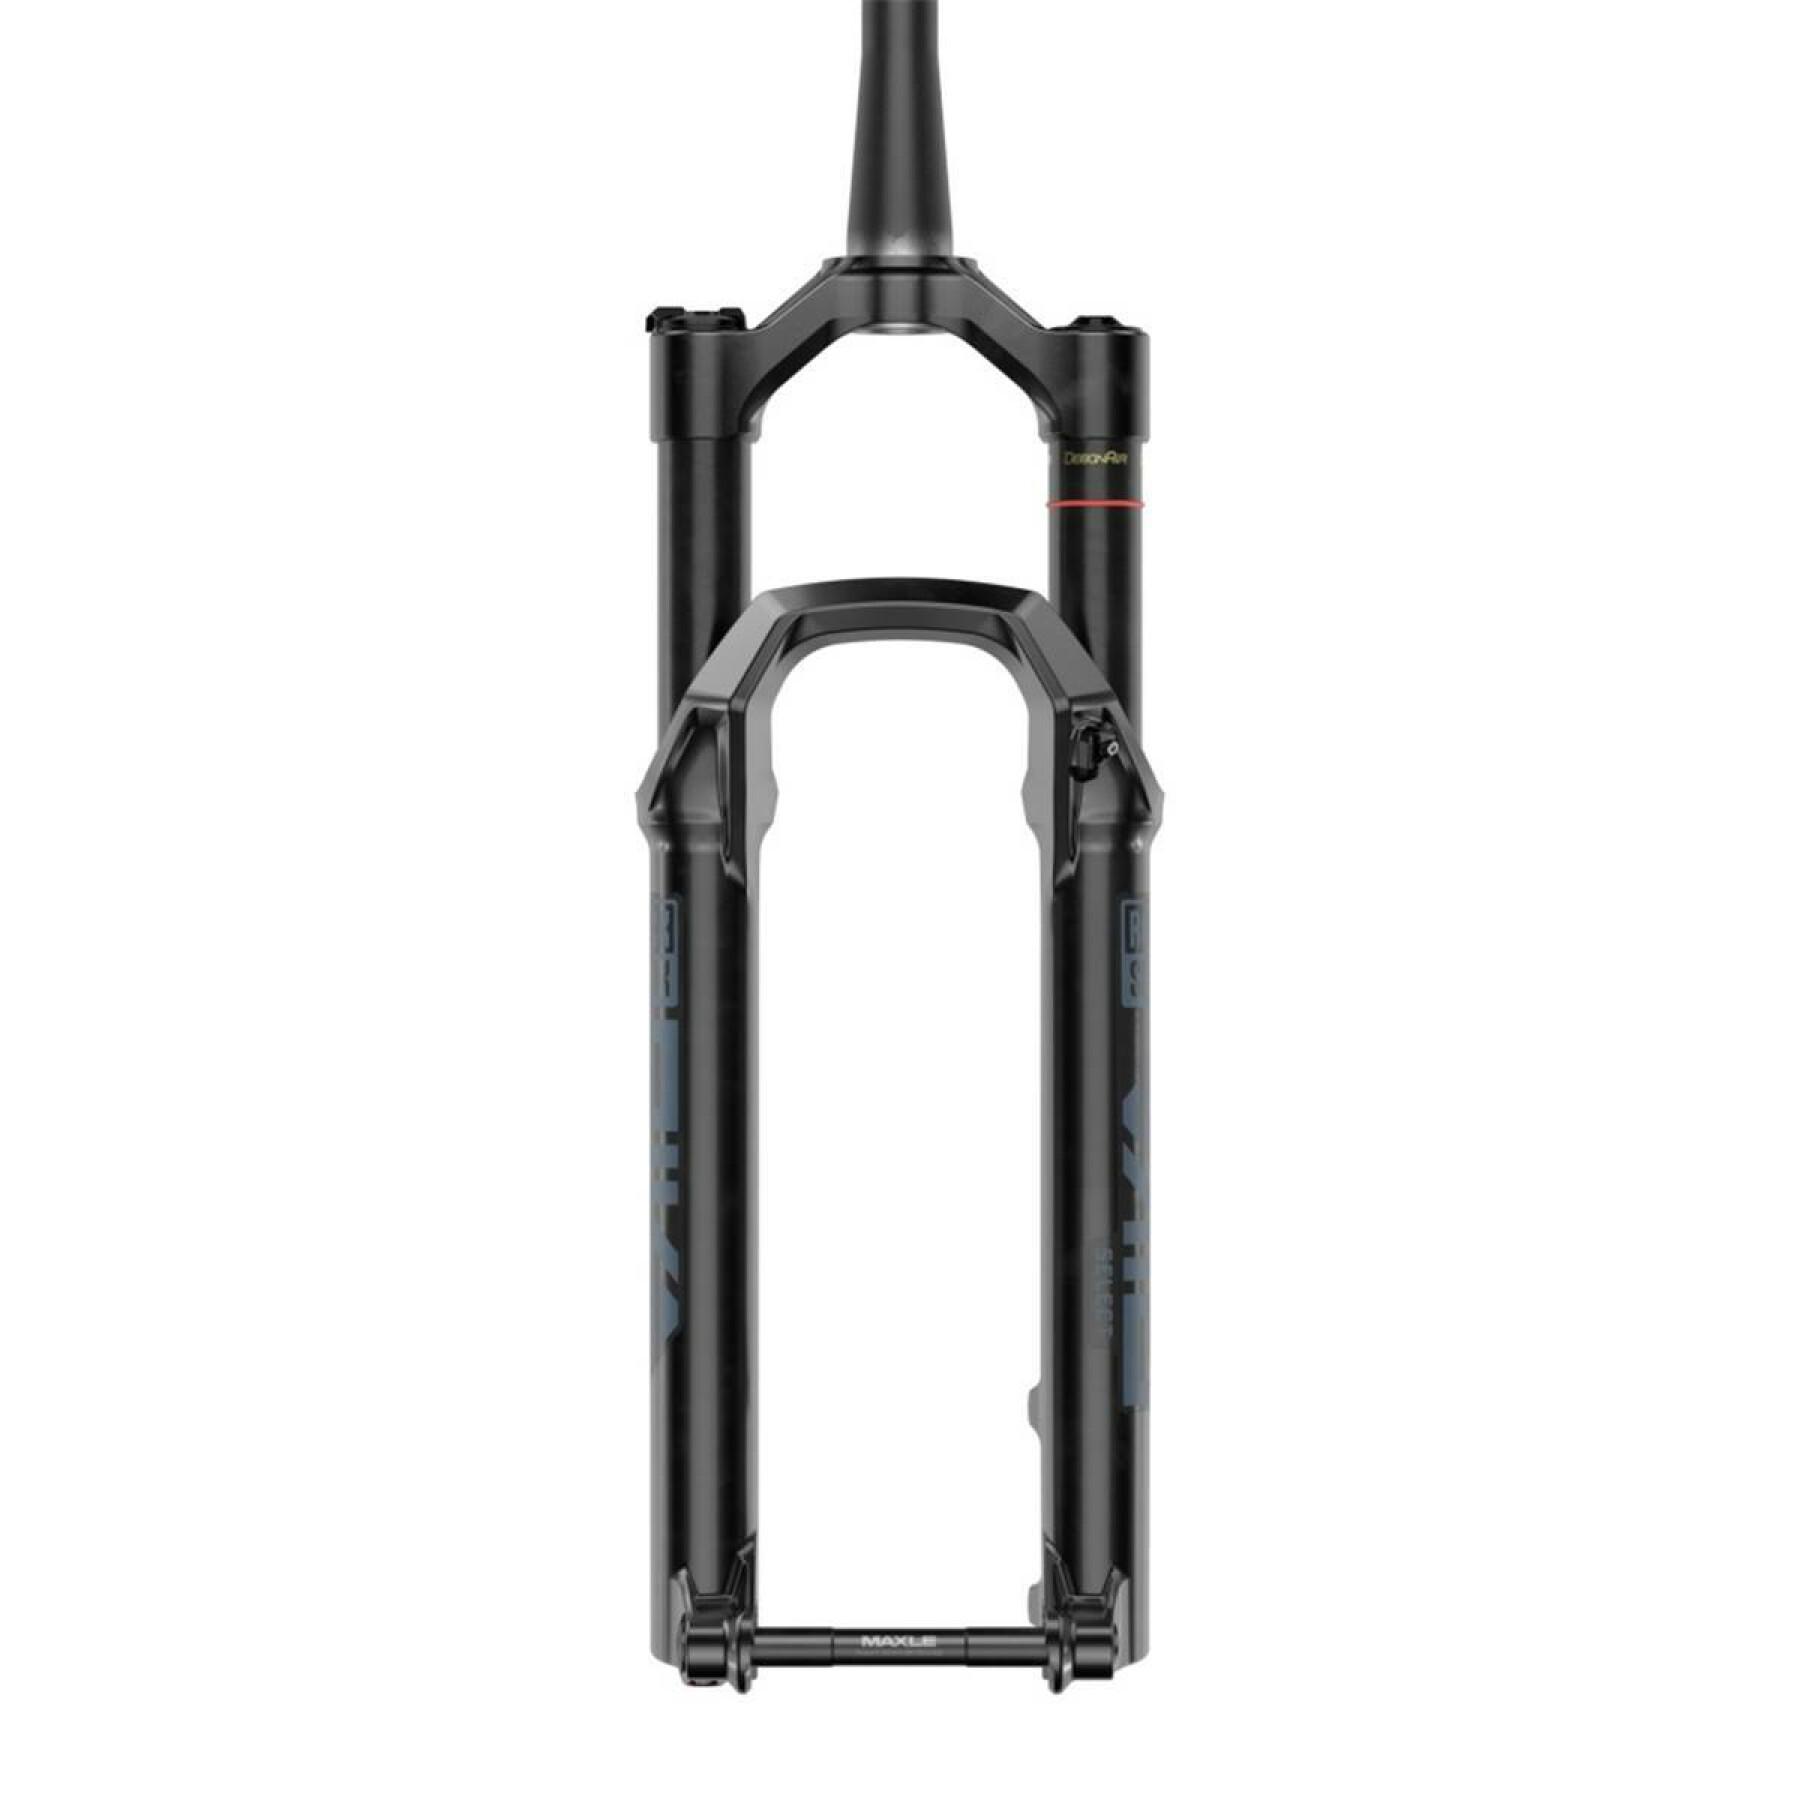 Widelec Rockshox Pike Select Charger Rc 27.5 Os37 C1